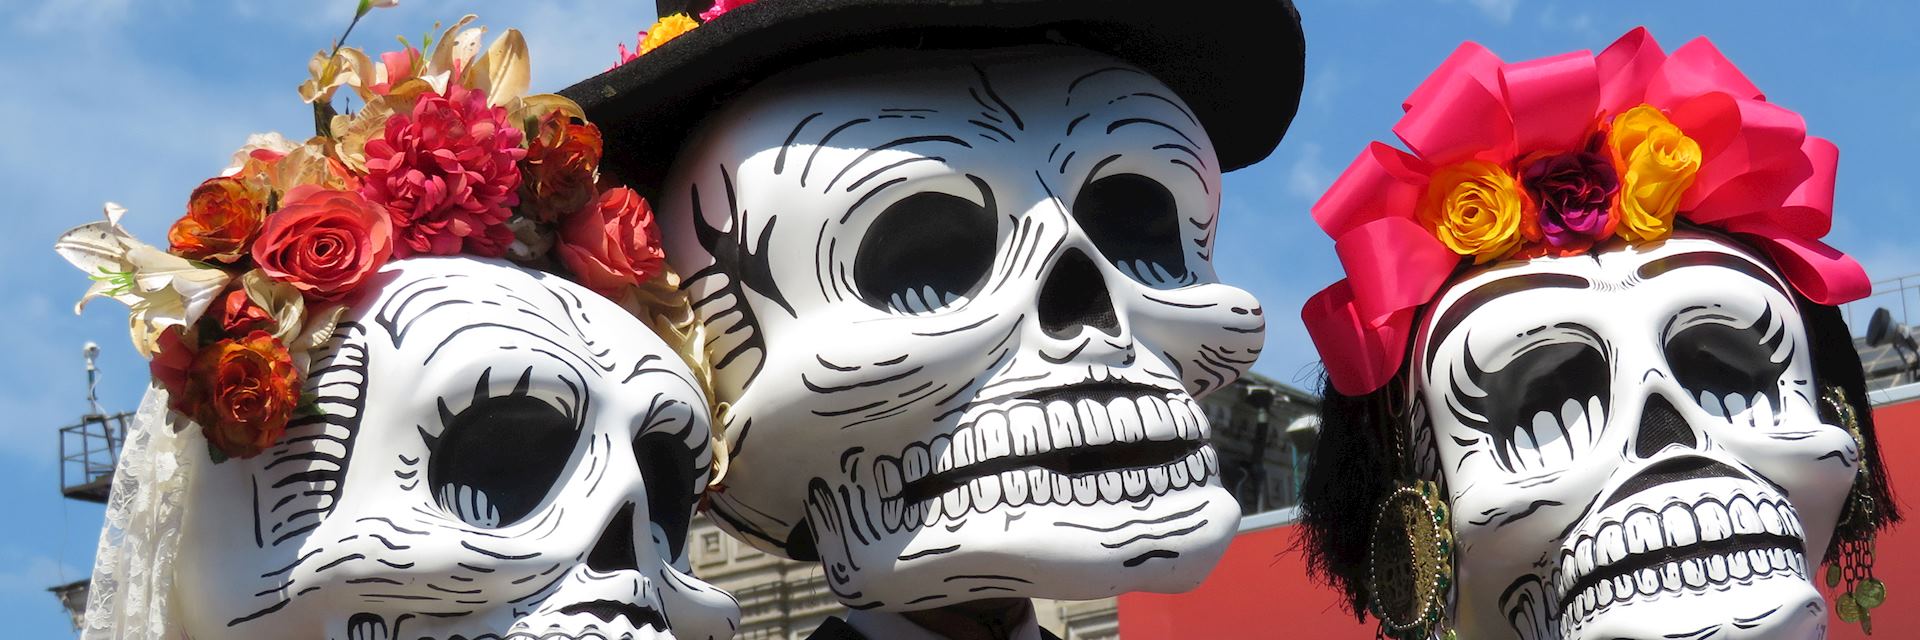 Day of the Dead, Mexico City